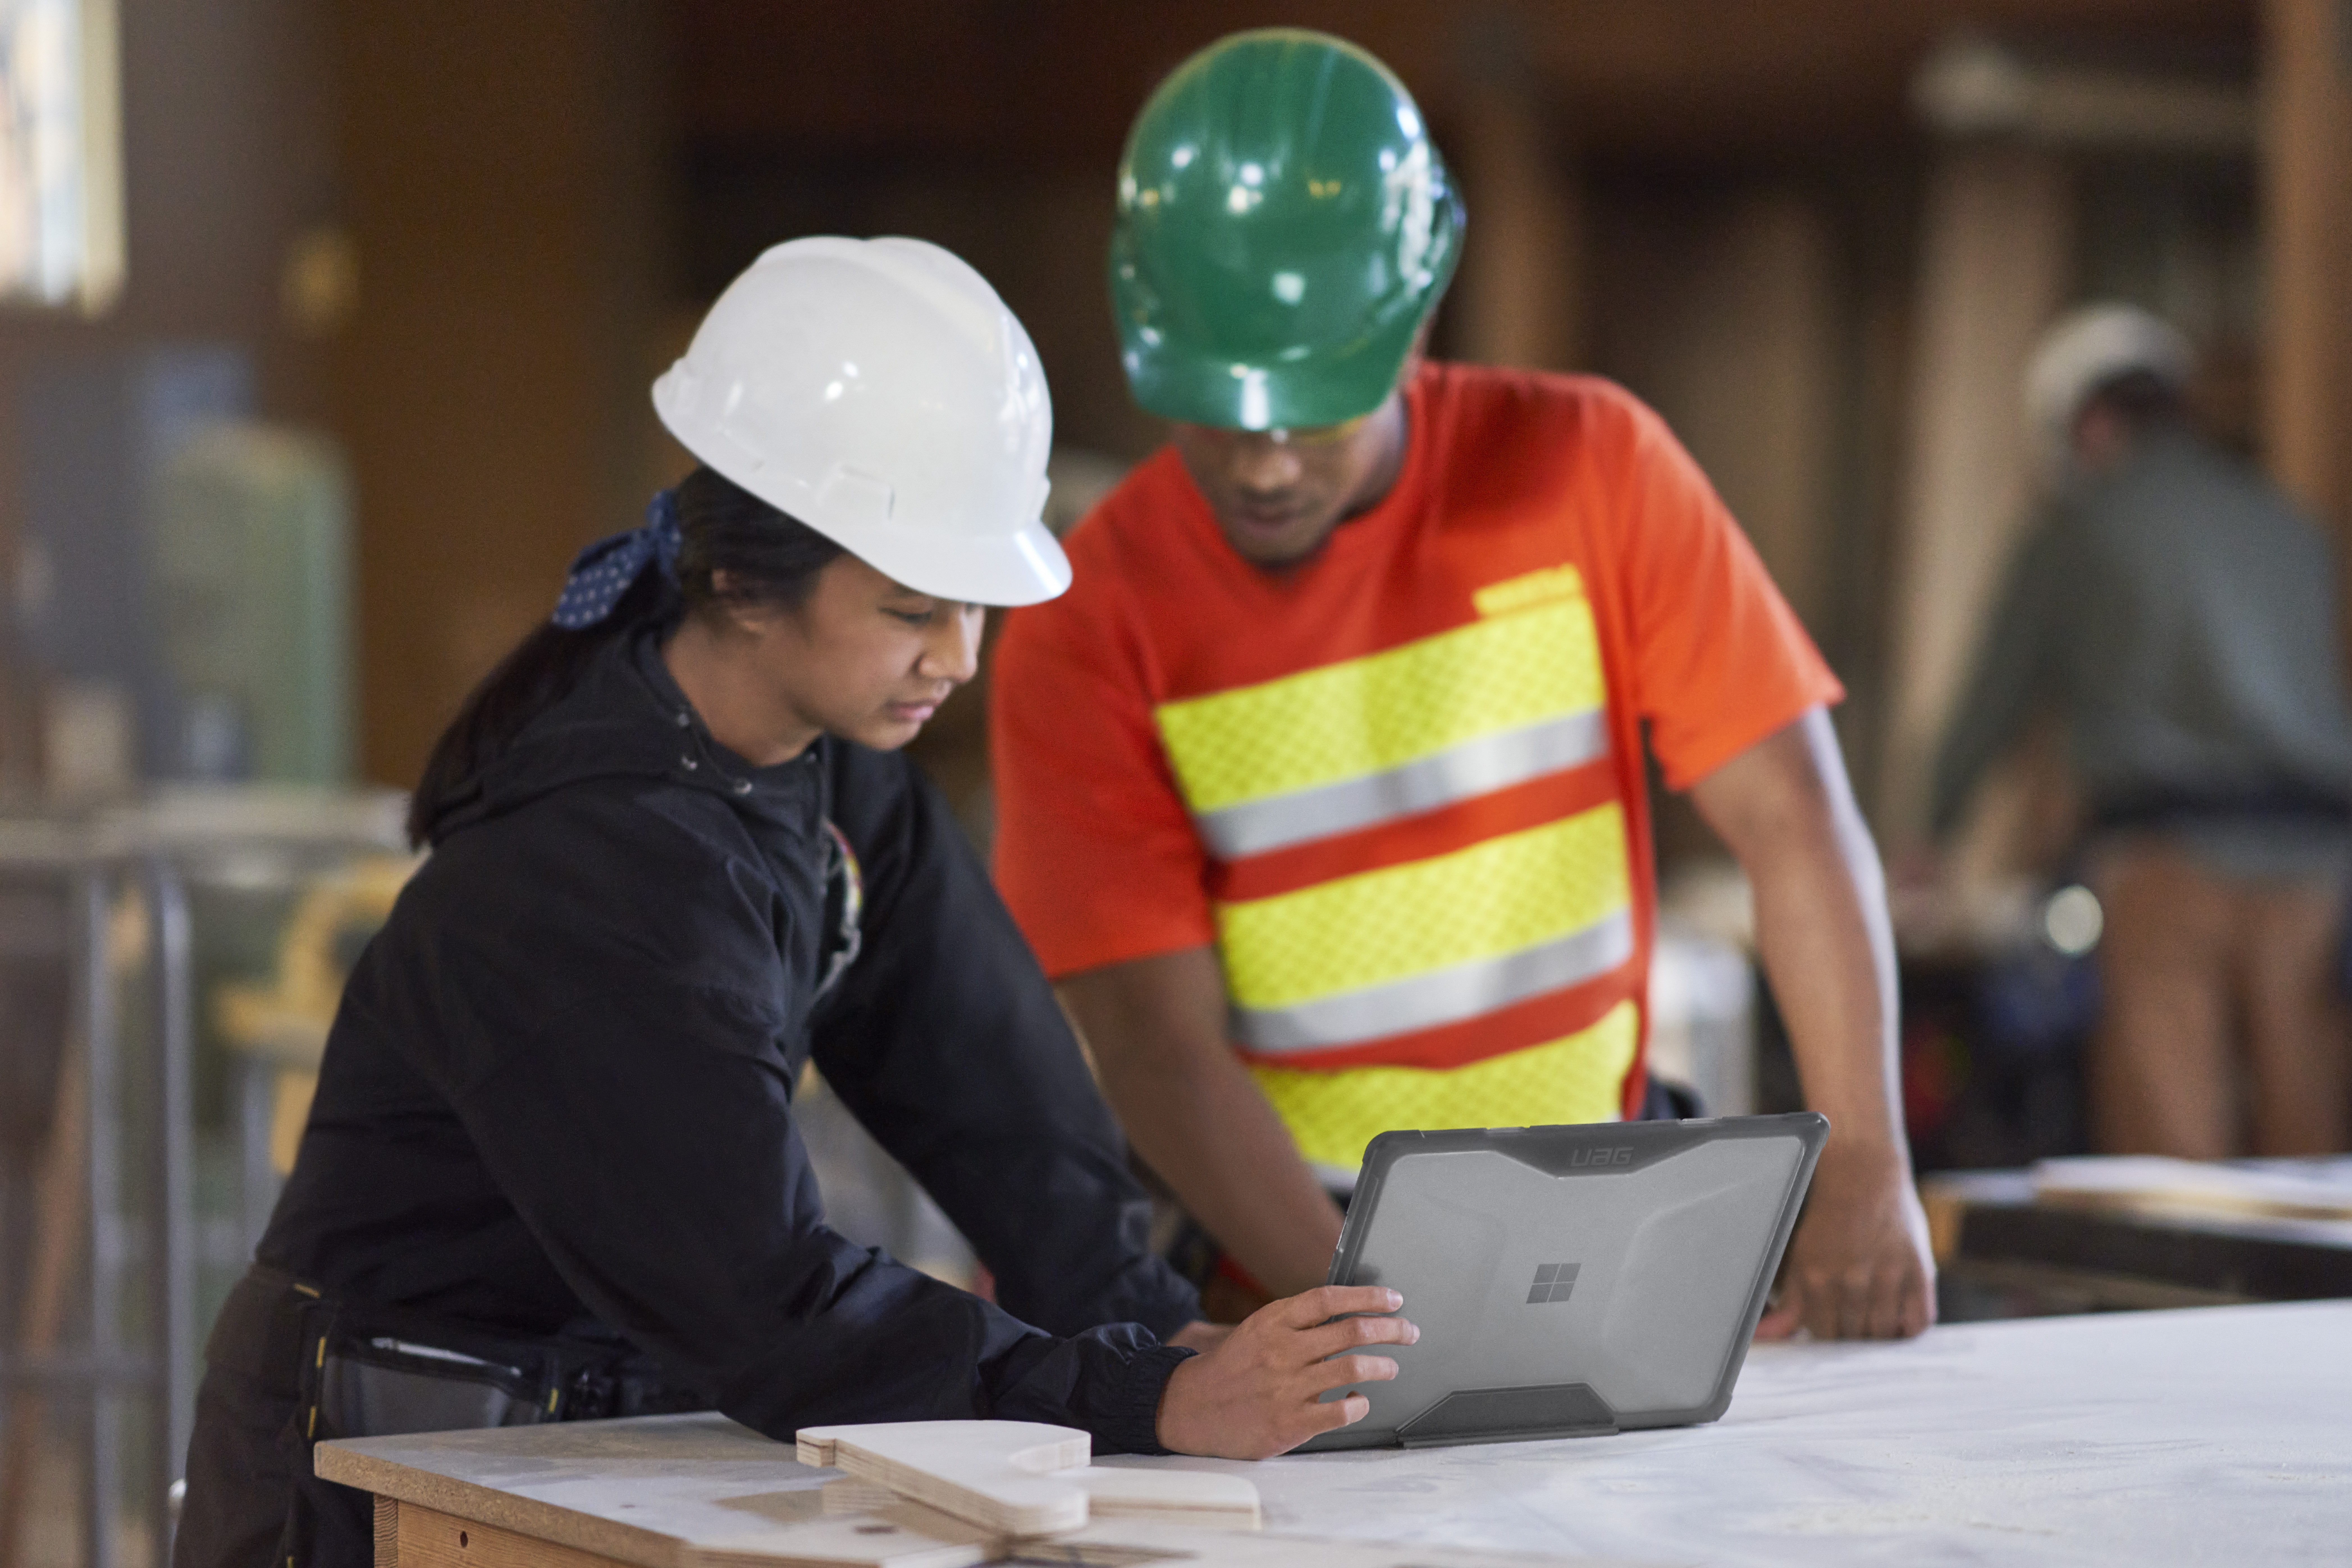 Construction workers planning using laptop